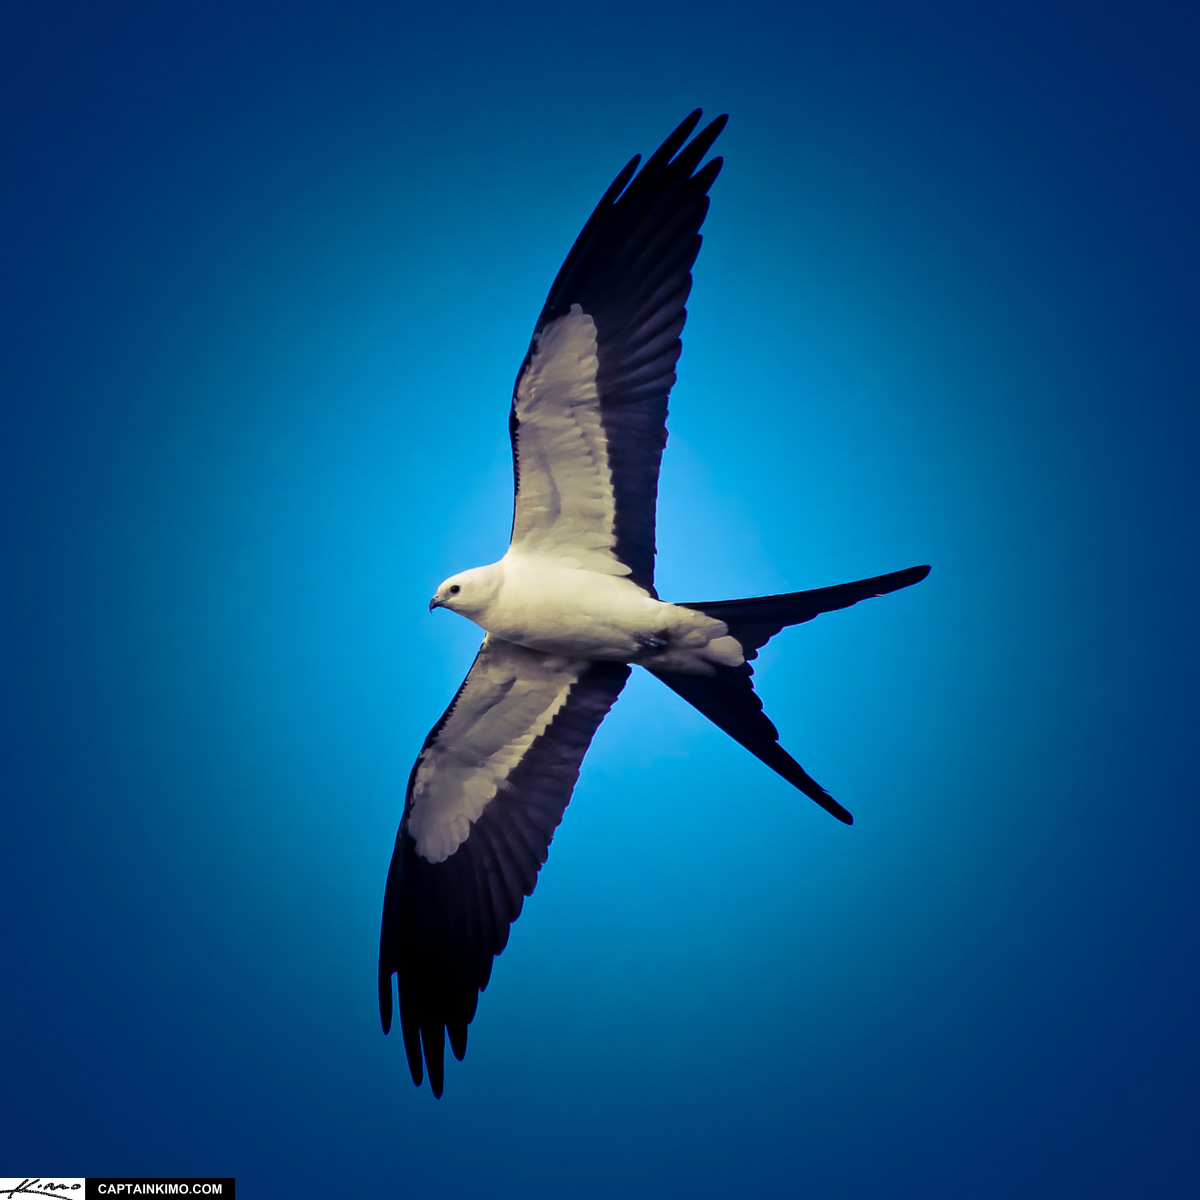 Swallow-tail Kite Bird Flying With Wing Spread Gliding Through Sky